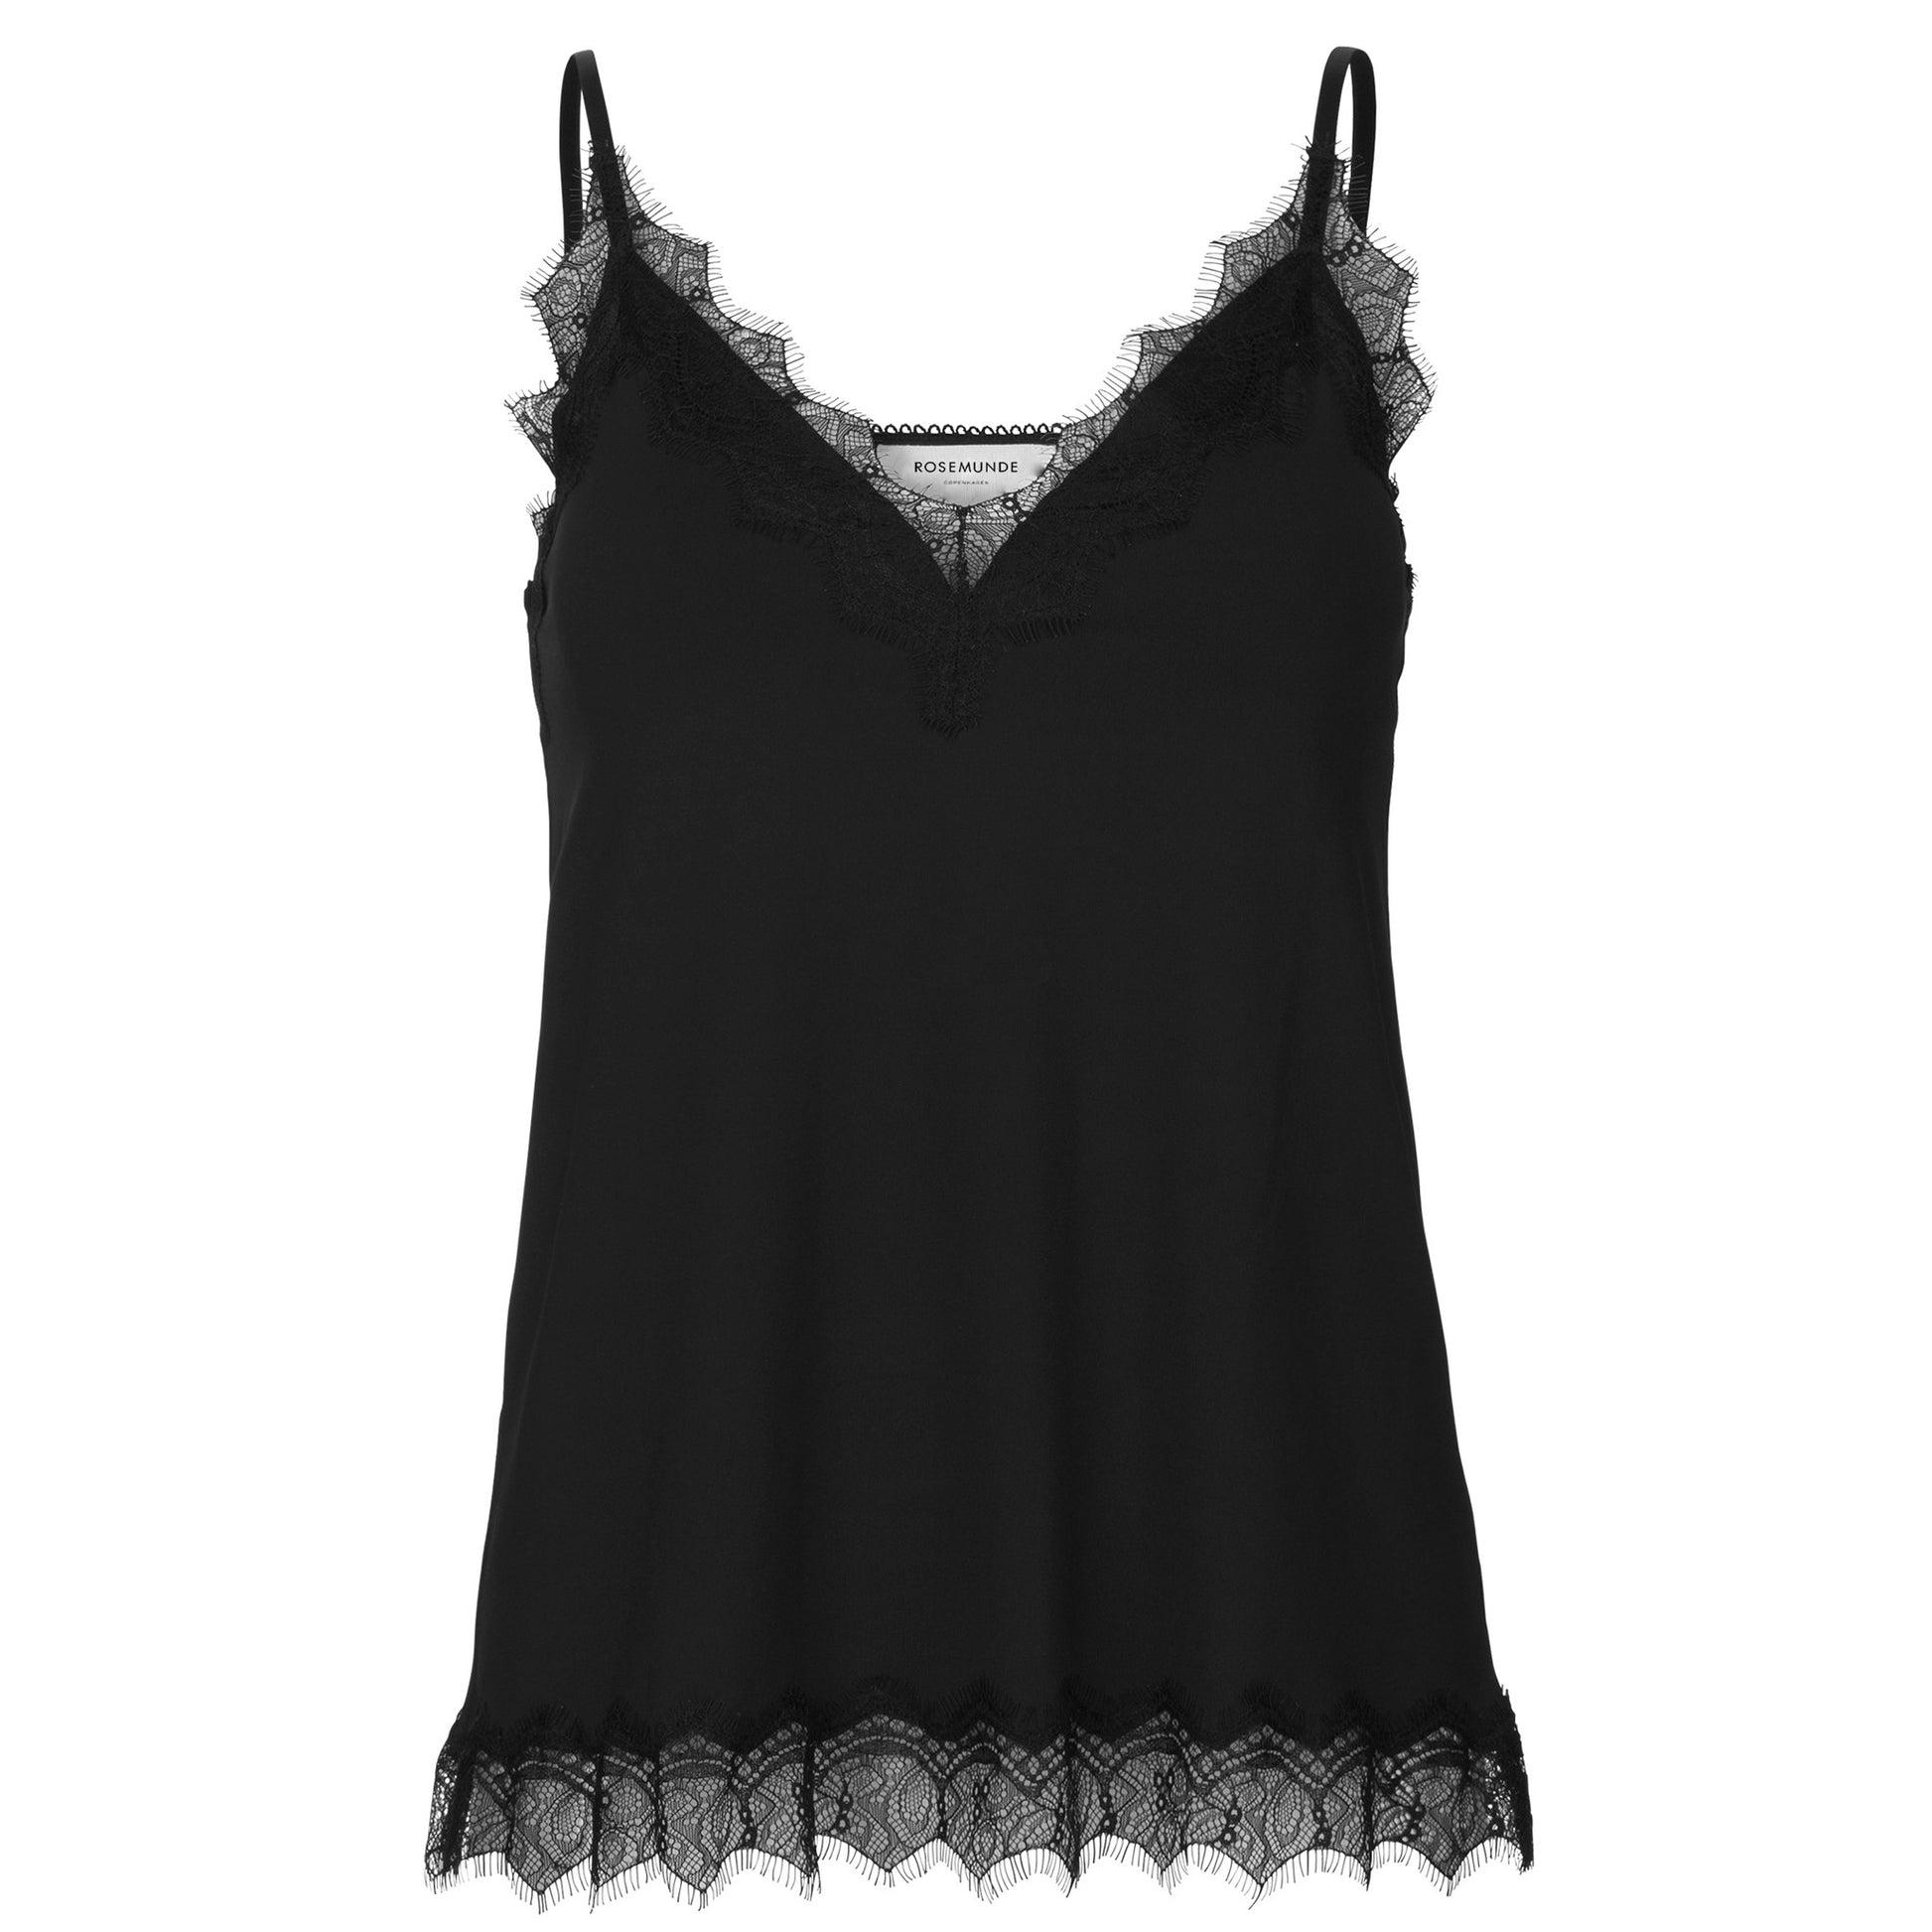 A lightweight Rosemunde black cami top with lace detailing.